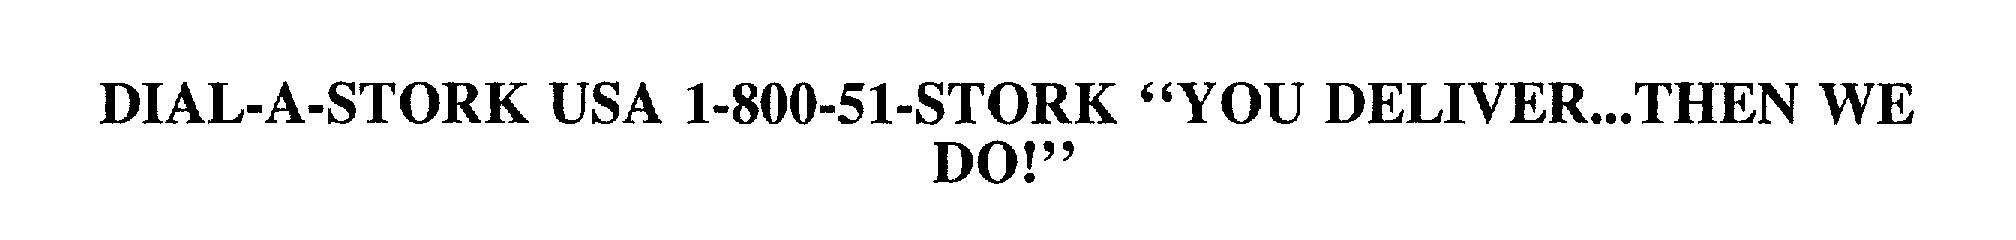  DIAL-A-STORK USA 1-800-51-STORK "YOU DELIVER...THEN WE DO!"